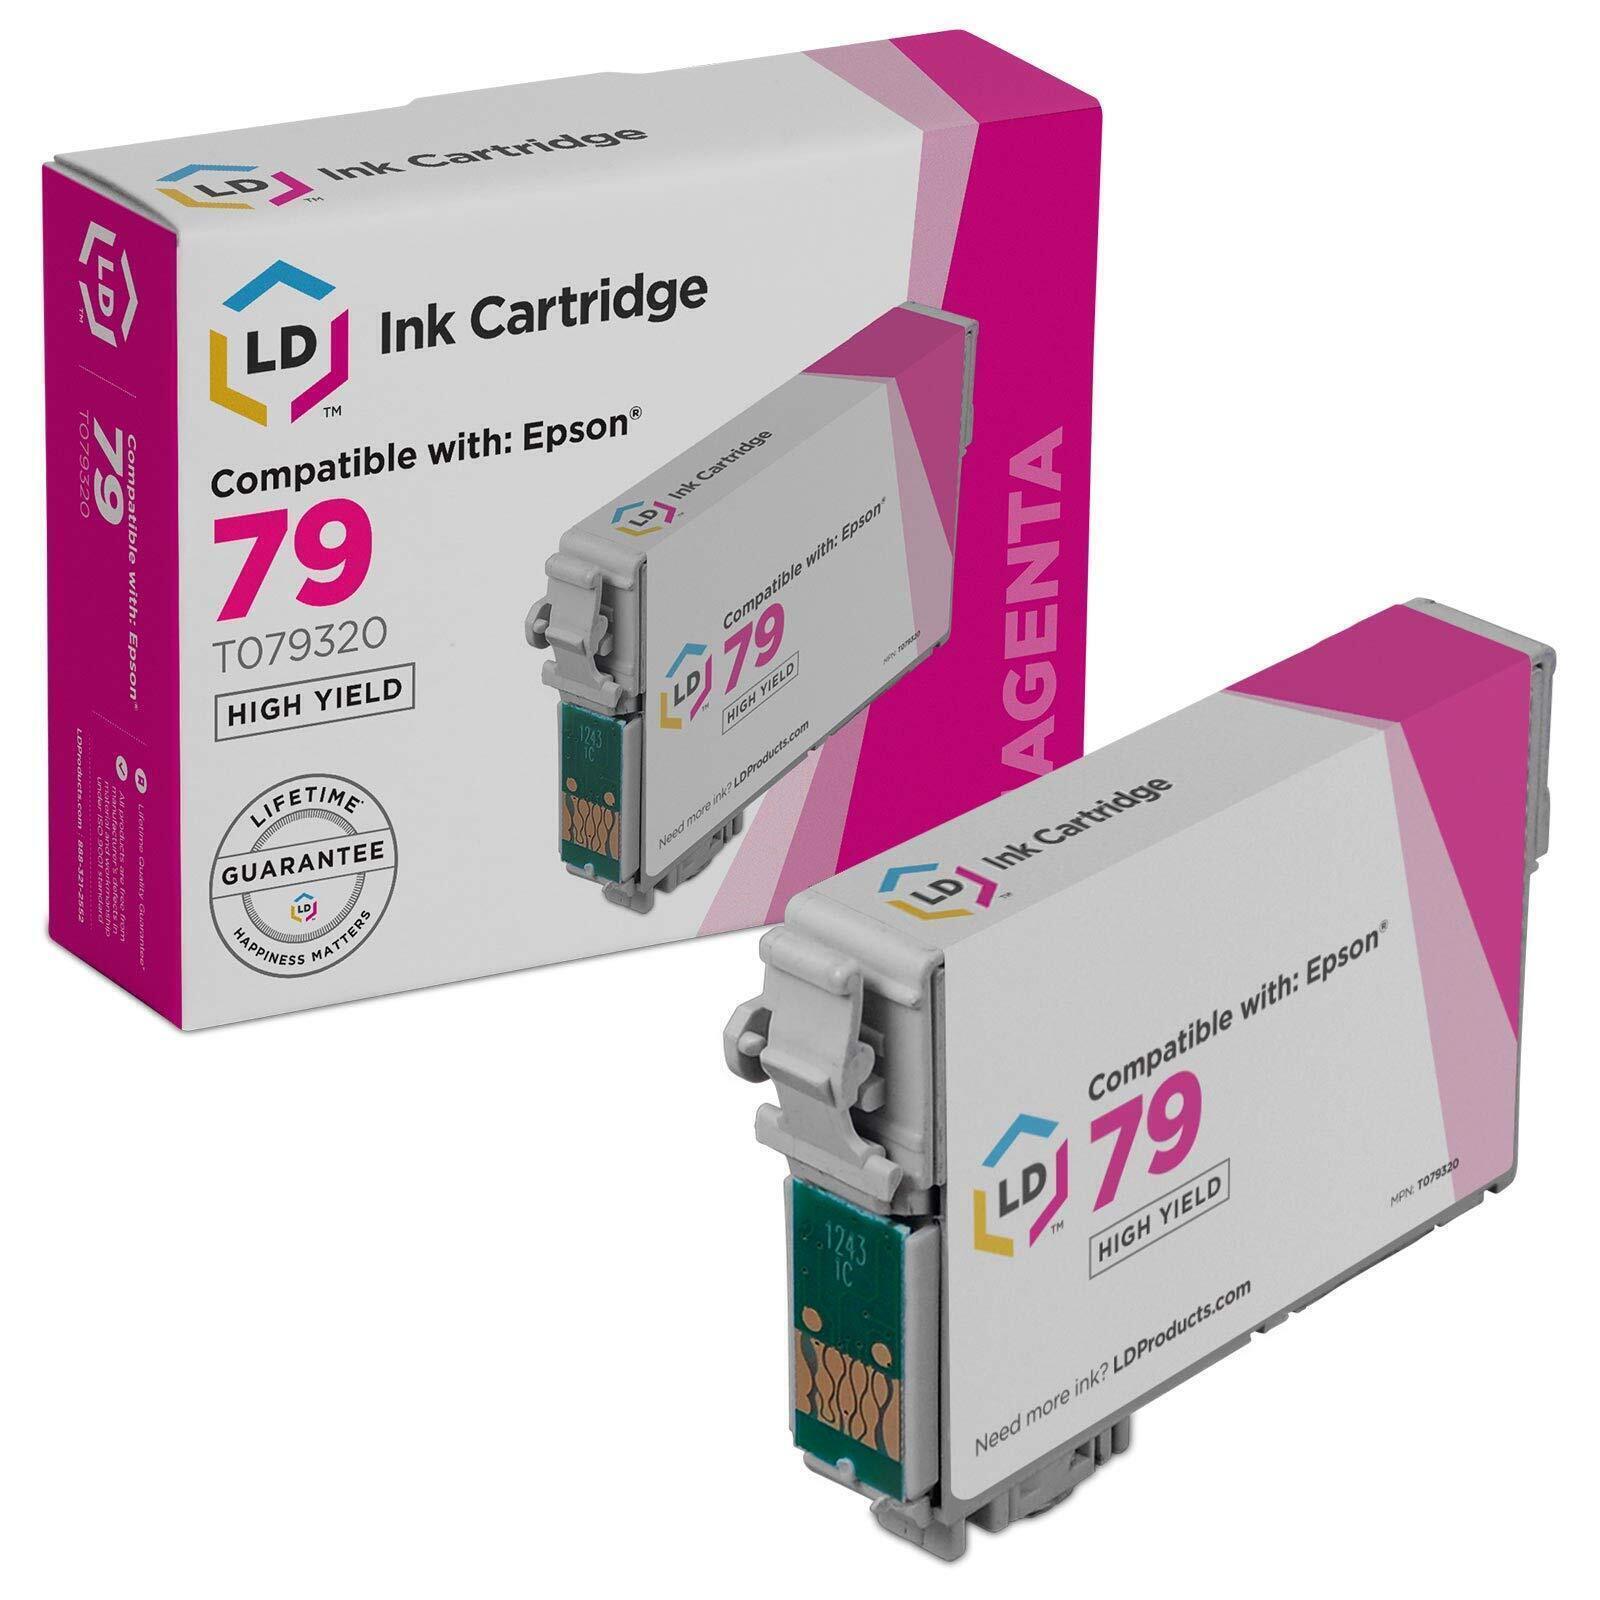 LD Products Reman Ink Cartridge Replacement for Epson 79 T079320 High